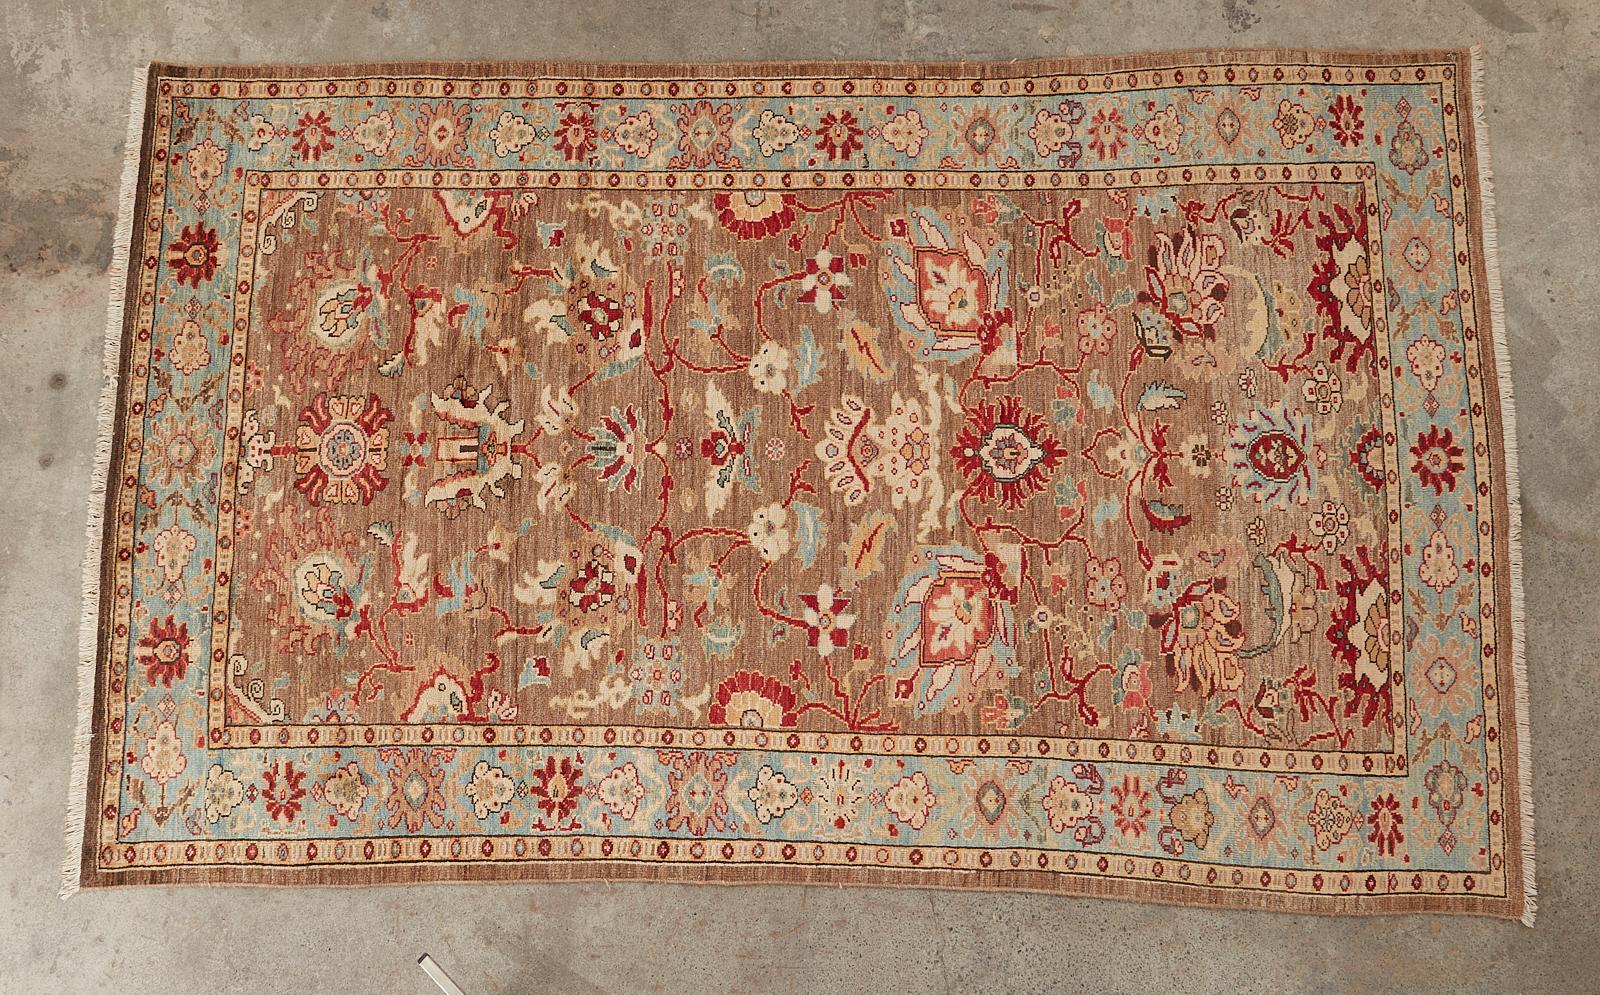 Gorgeous Persian Mahal Style hand-knotted wool rug featuring jewel toned colors. The carpet is decorated with large, whimsical flower heads over a dark beige field, which makes the light blues and ruby reds boldly stand out. From an estate in San